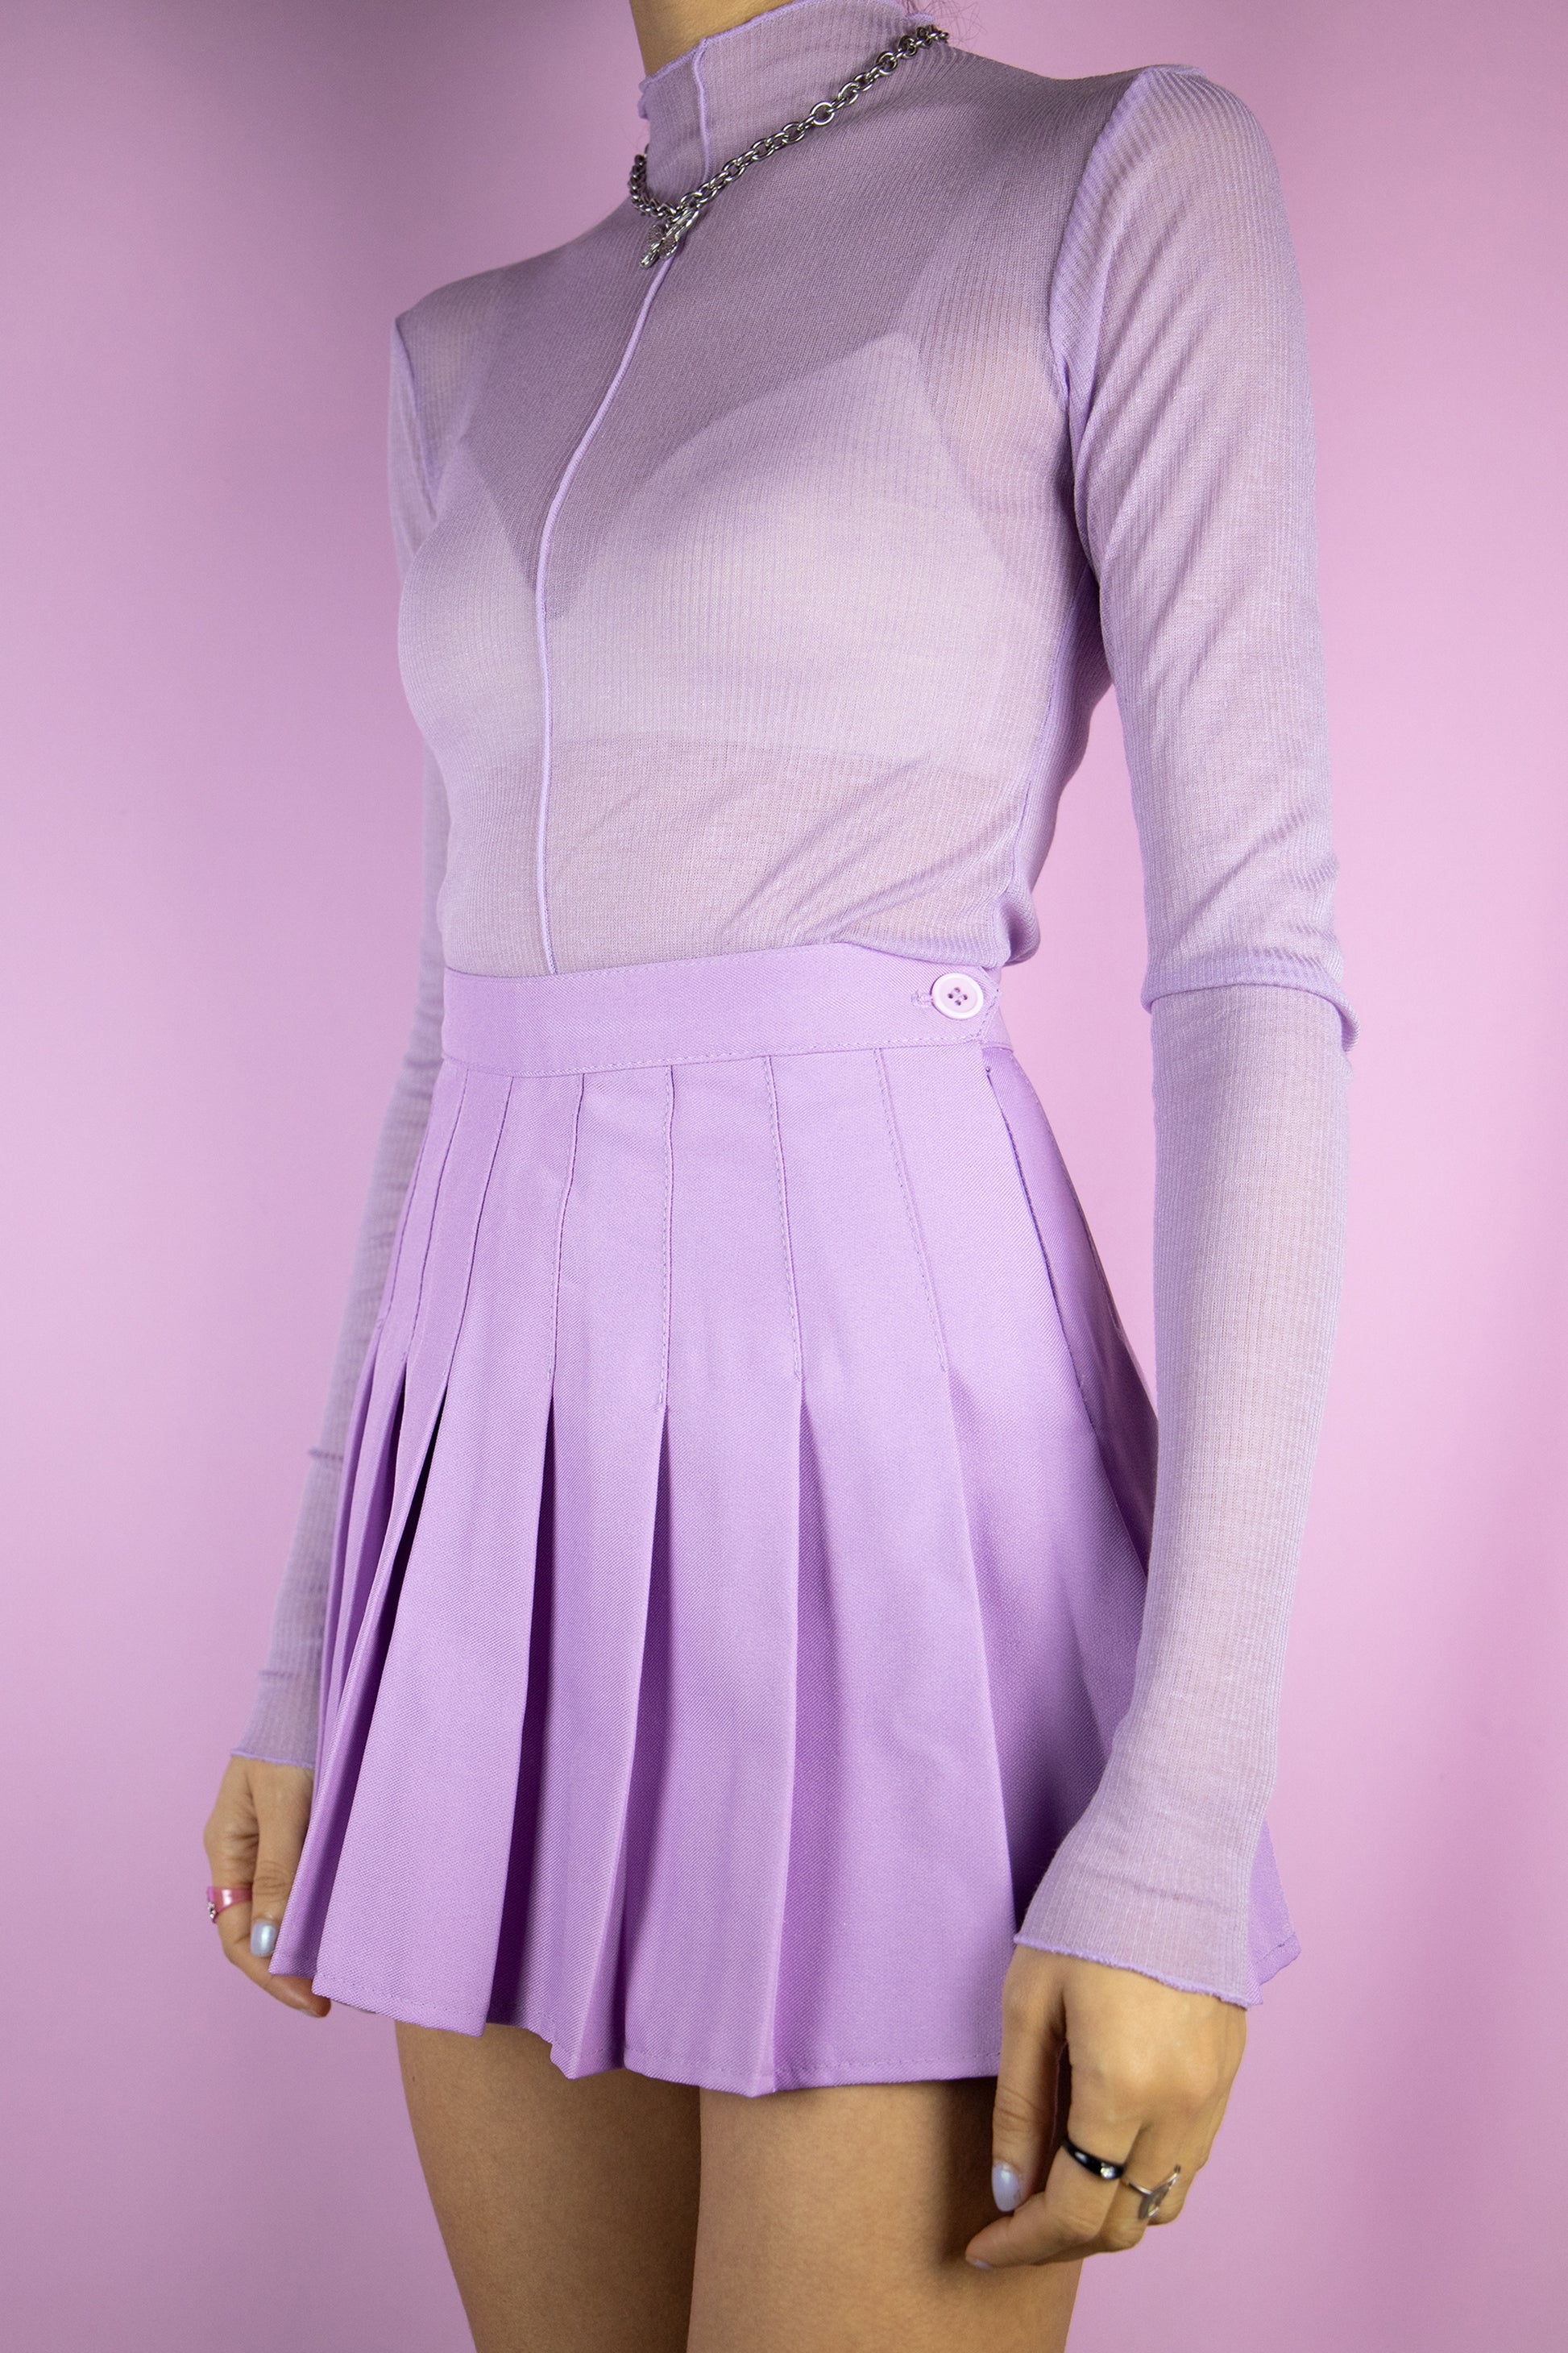 The Y2K Lilac Pleated Mini Skirt is a vintage pastel light purple pleated skirt with a side zipper closure. Classic preppy 2000s cyber mini skirt.